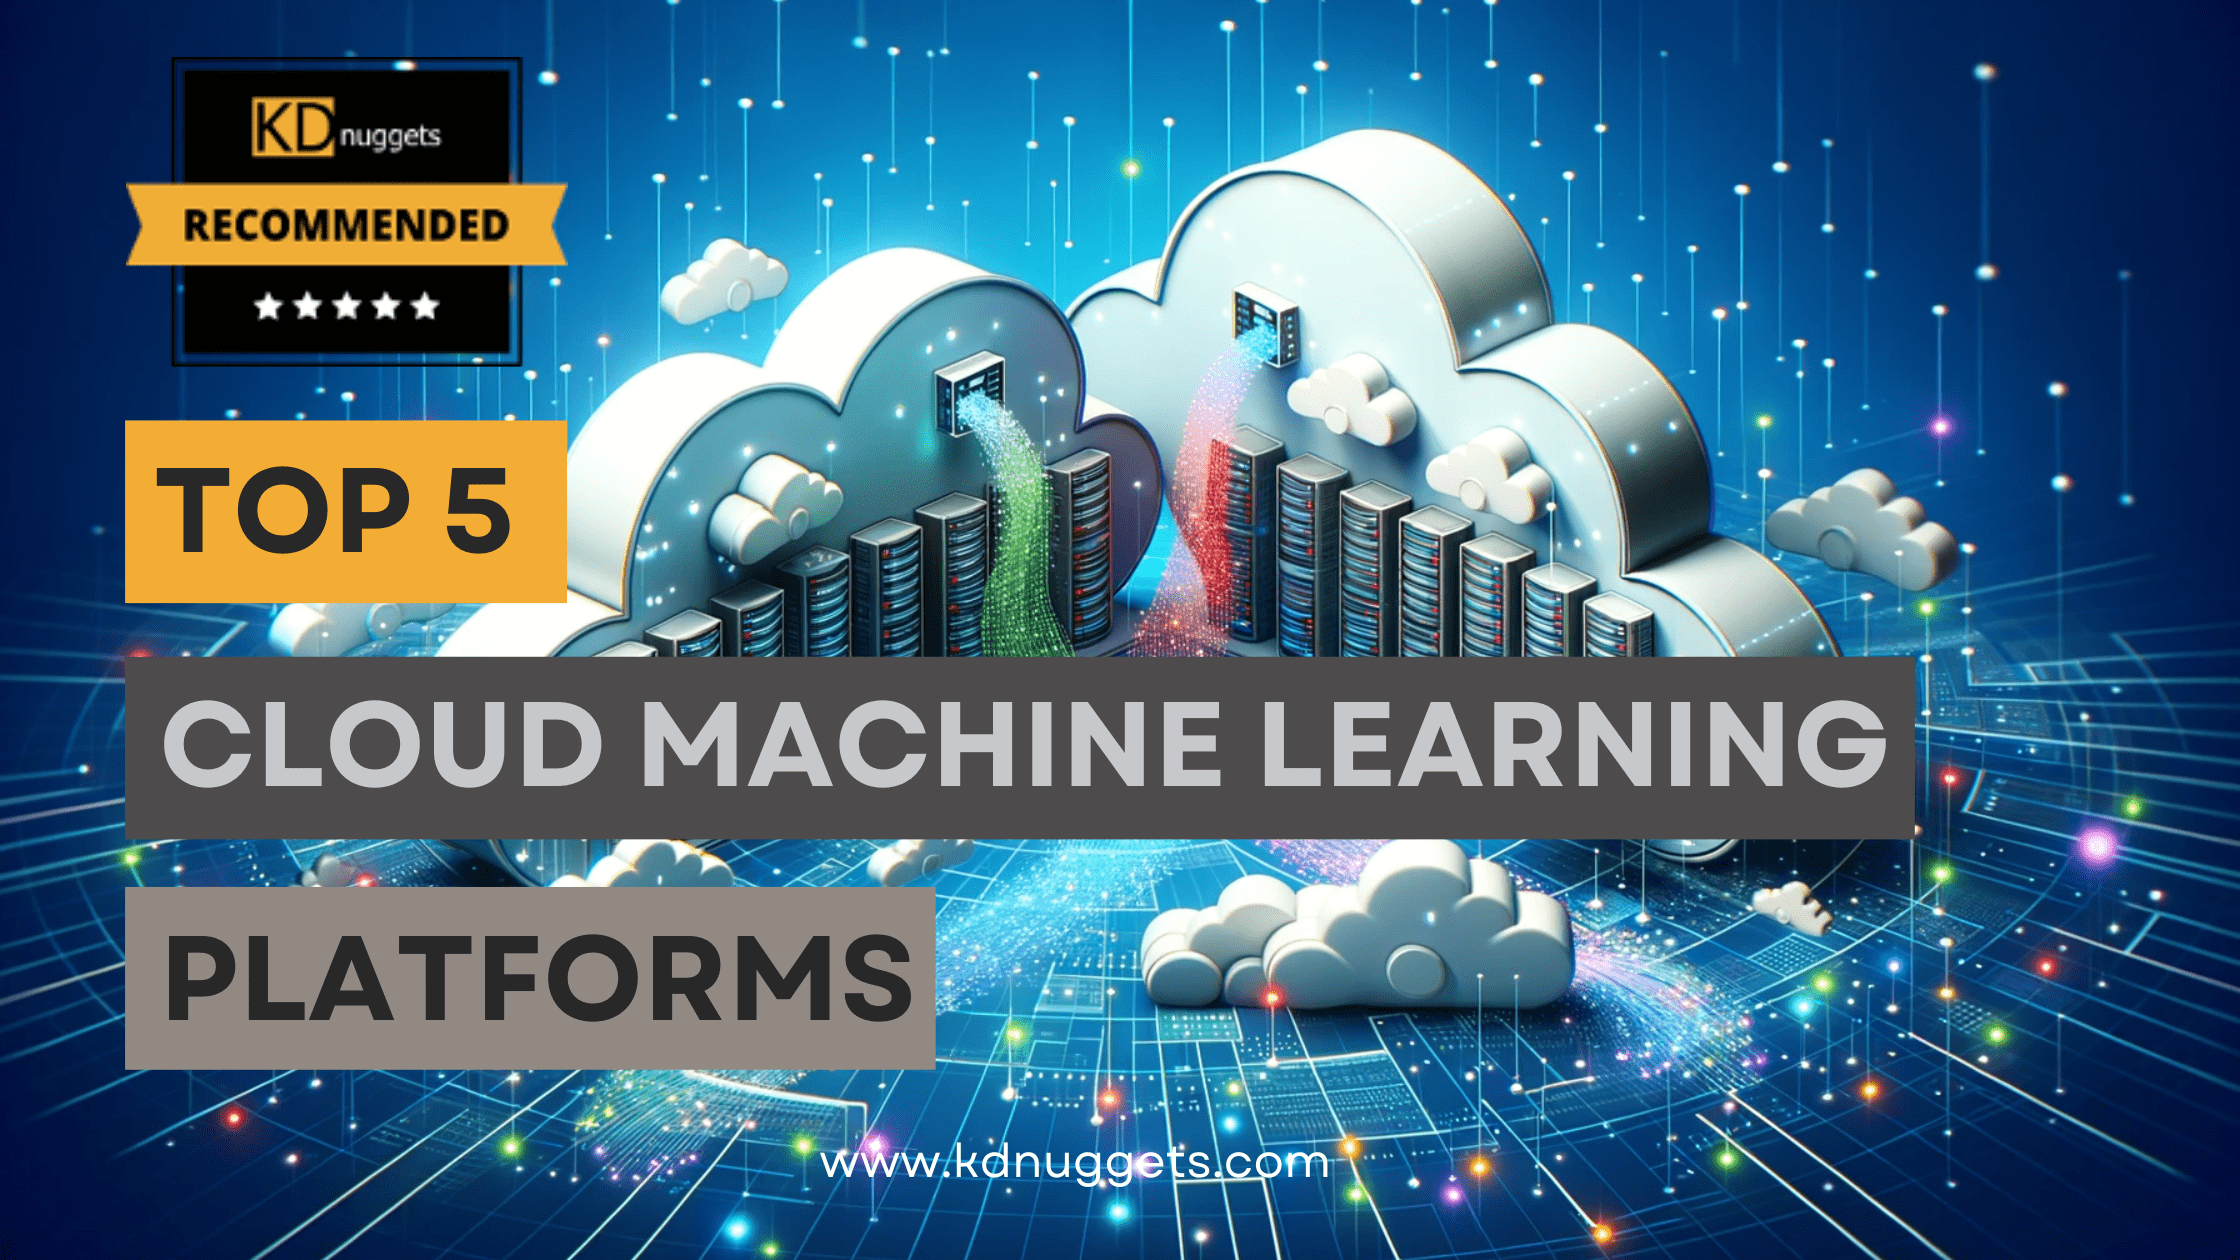 The Top 5 Cloud Machine Learning Platforms & Tools